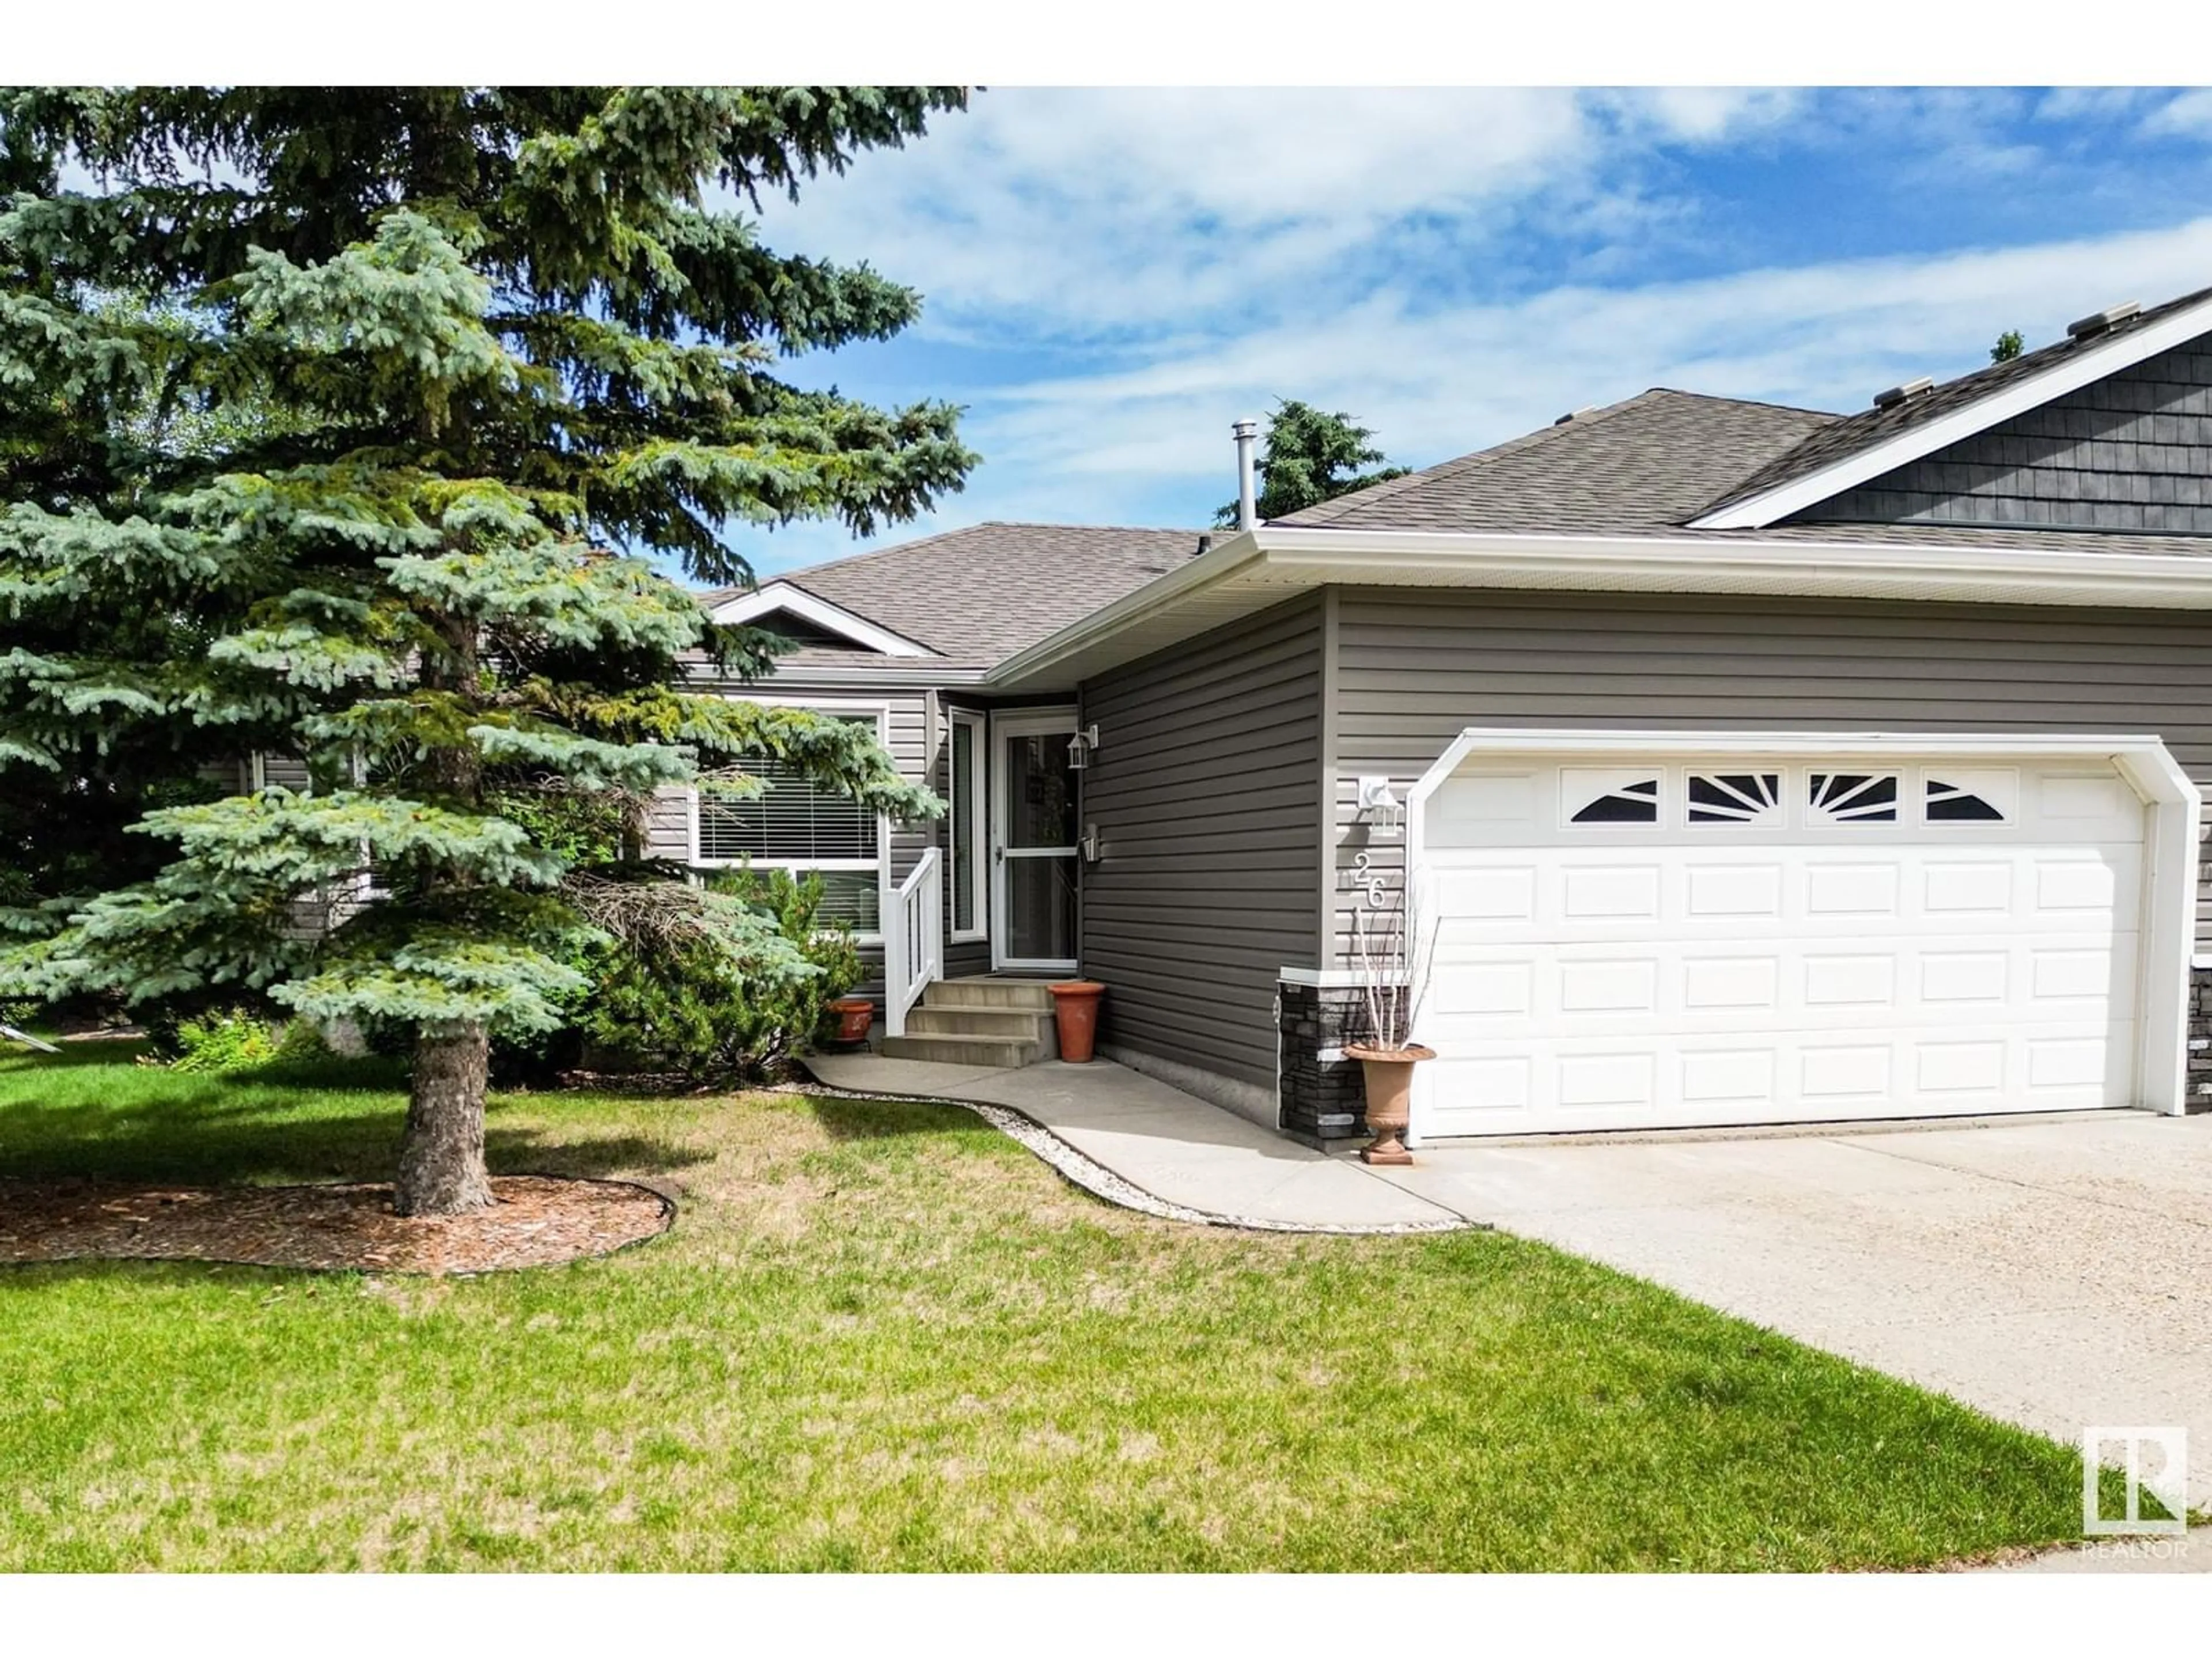 Frontside or backside of a home for #26 49 Colwill BV, Sherwood Park Alberta T8A6C3